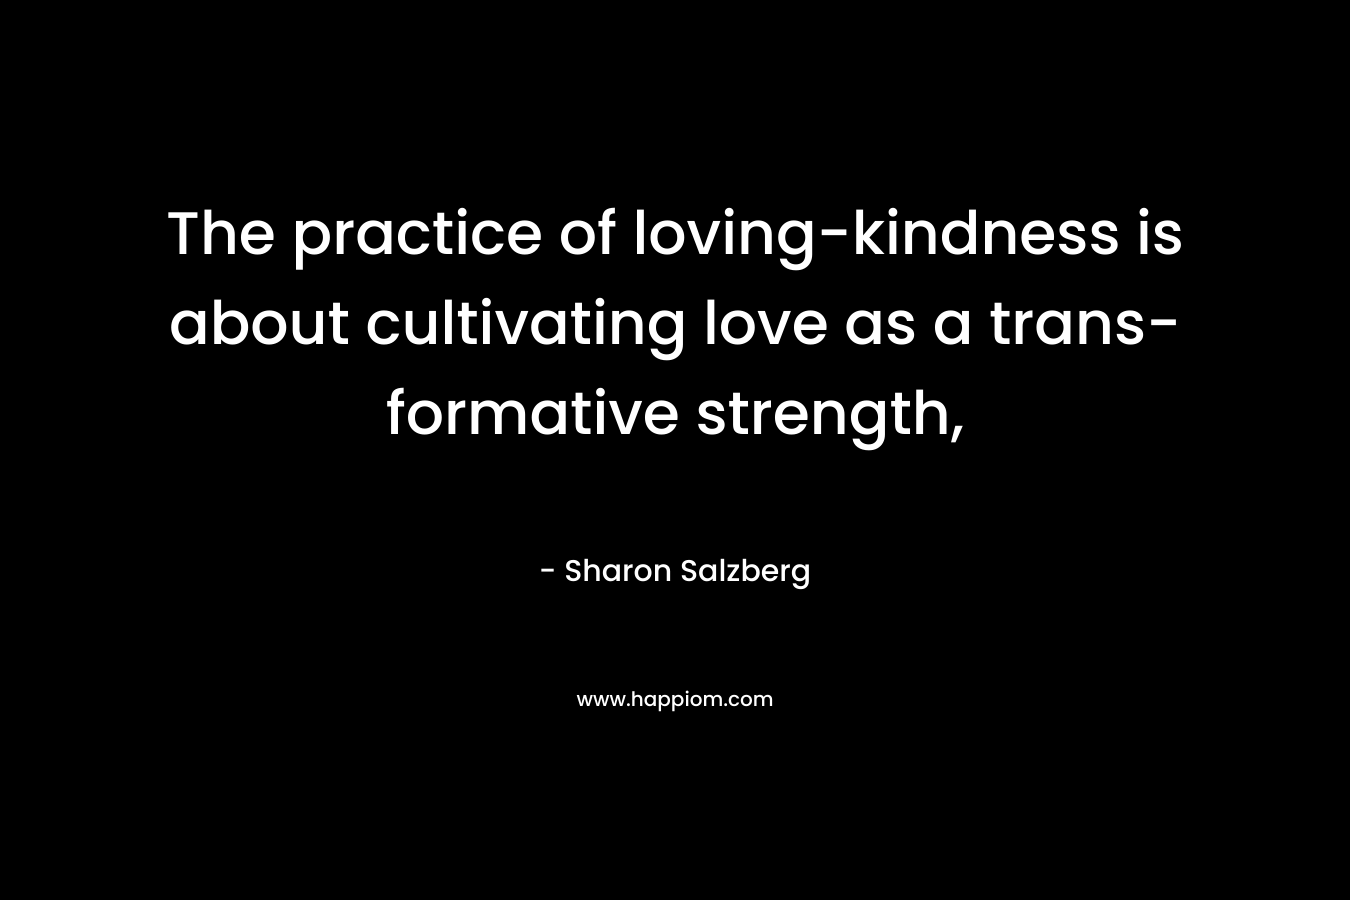 The practice of loving-kindness is about cultivating love as a trans-formative strength,